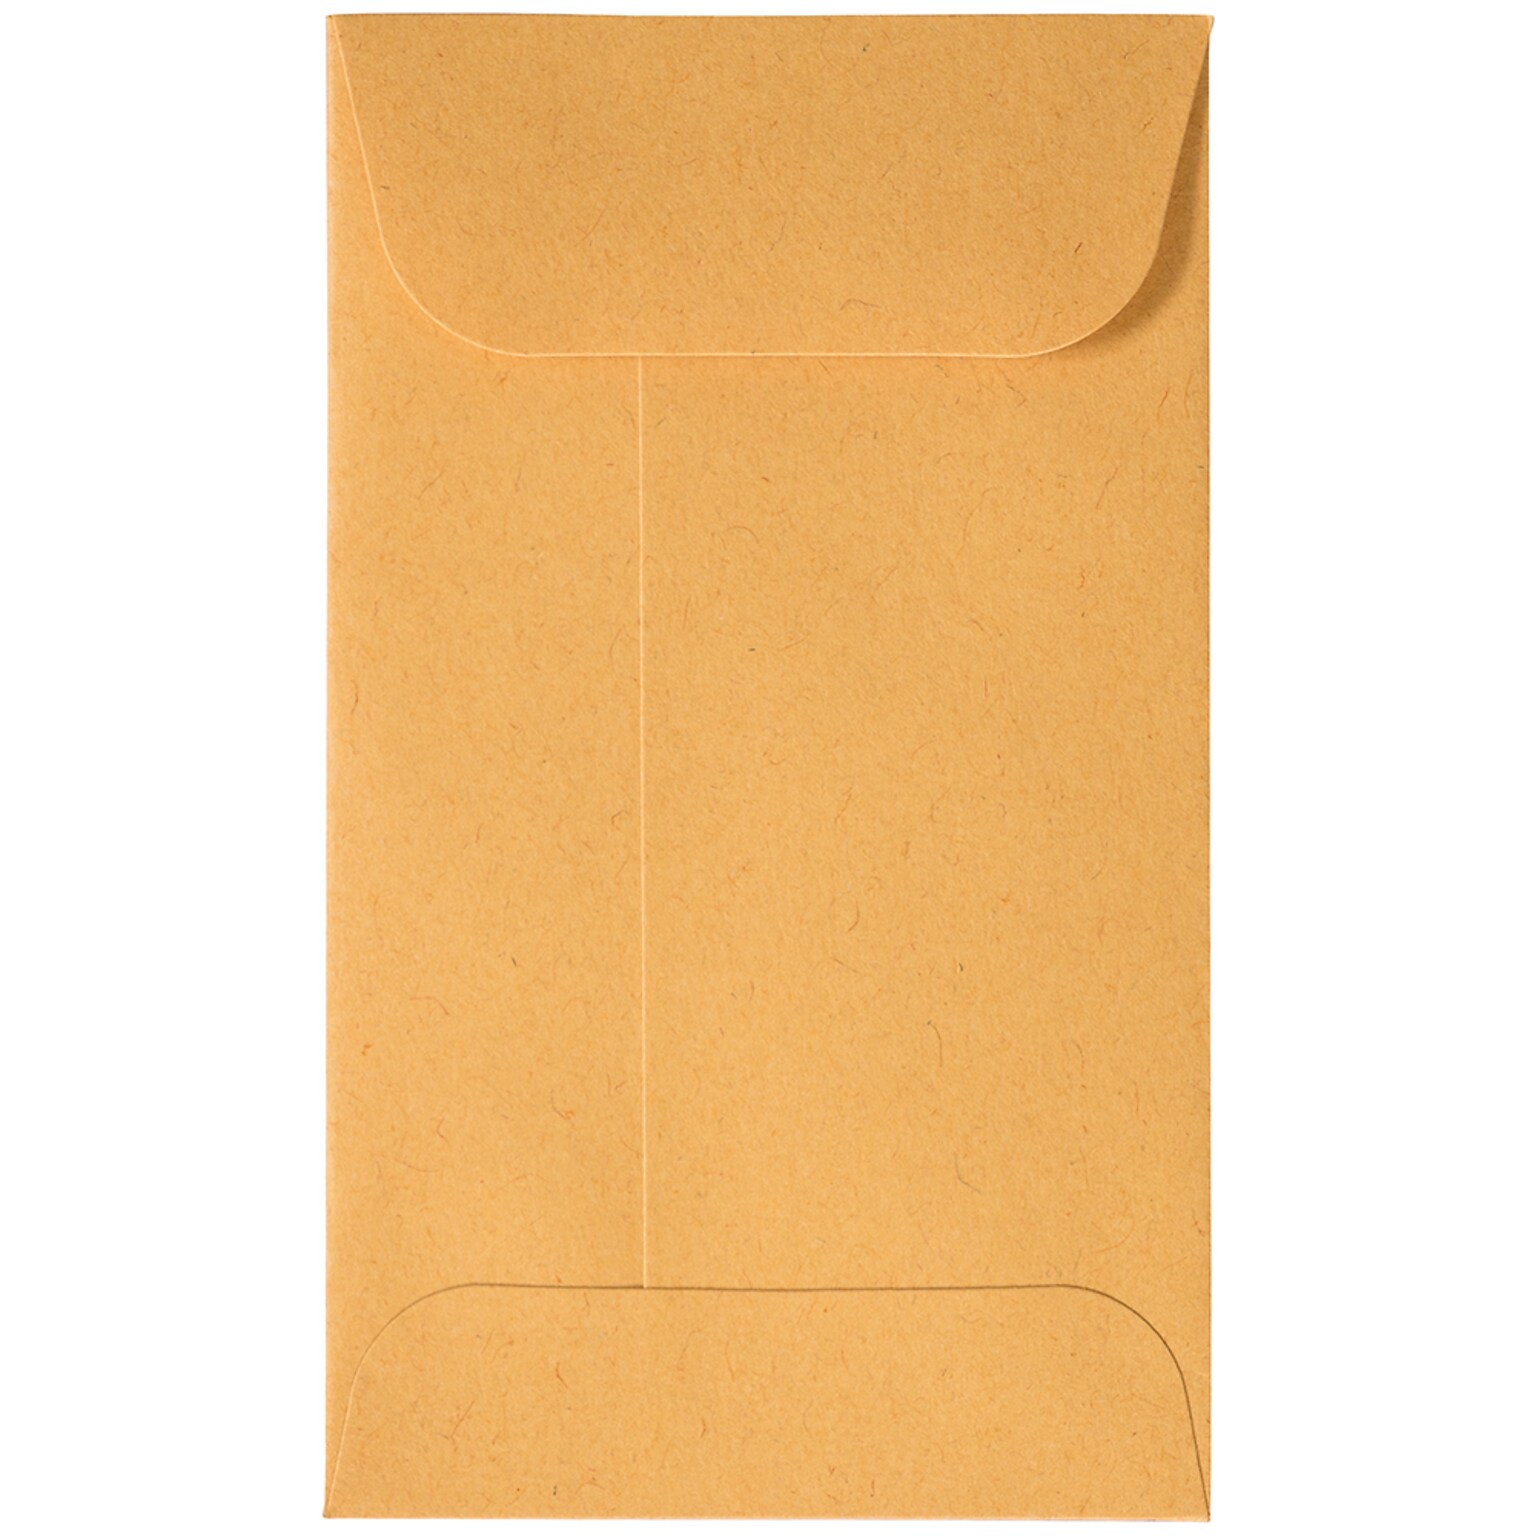 JAM Paper #3 Coin Business Commercial Envelopes w/ Peel & Seal Closure, 2 1/2 x 4 1/4, Brown Kraft, 50/Pack (400238460I)